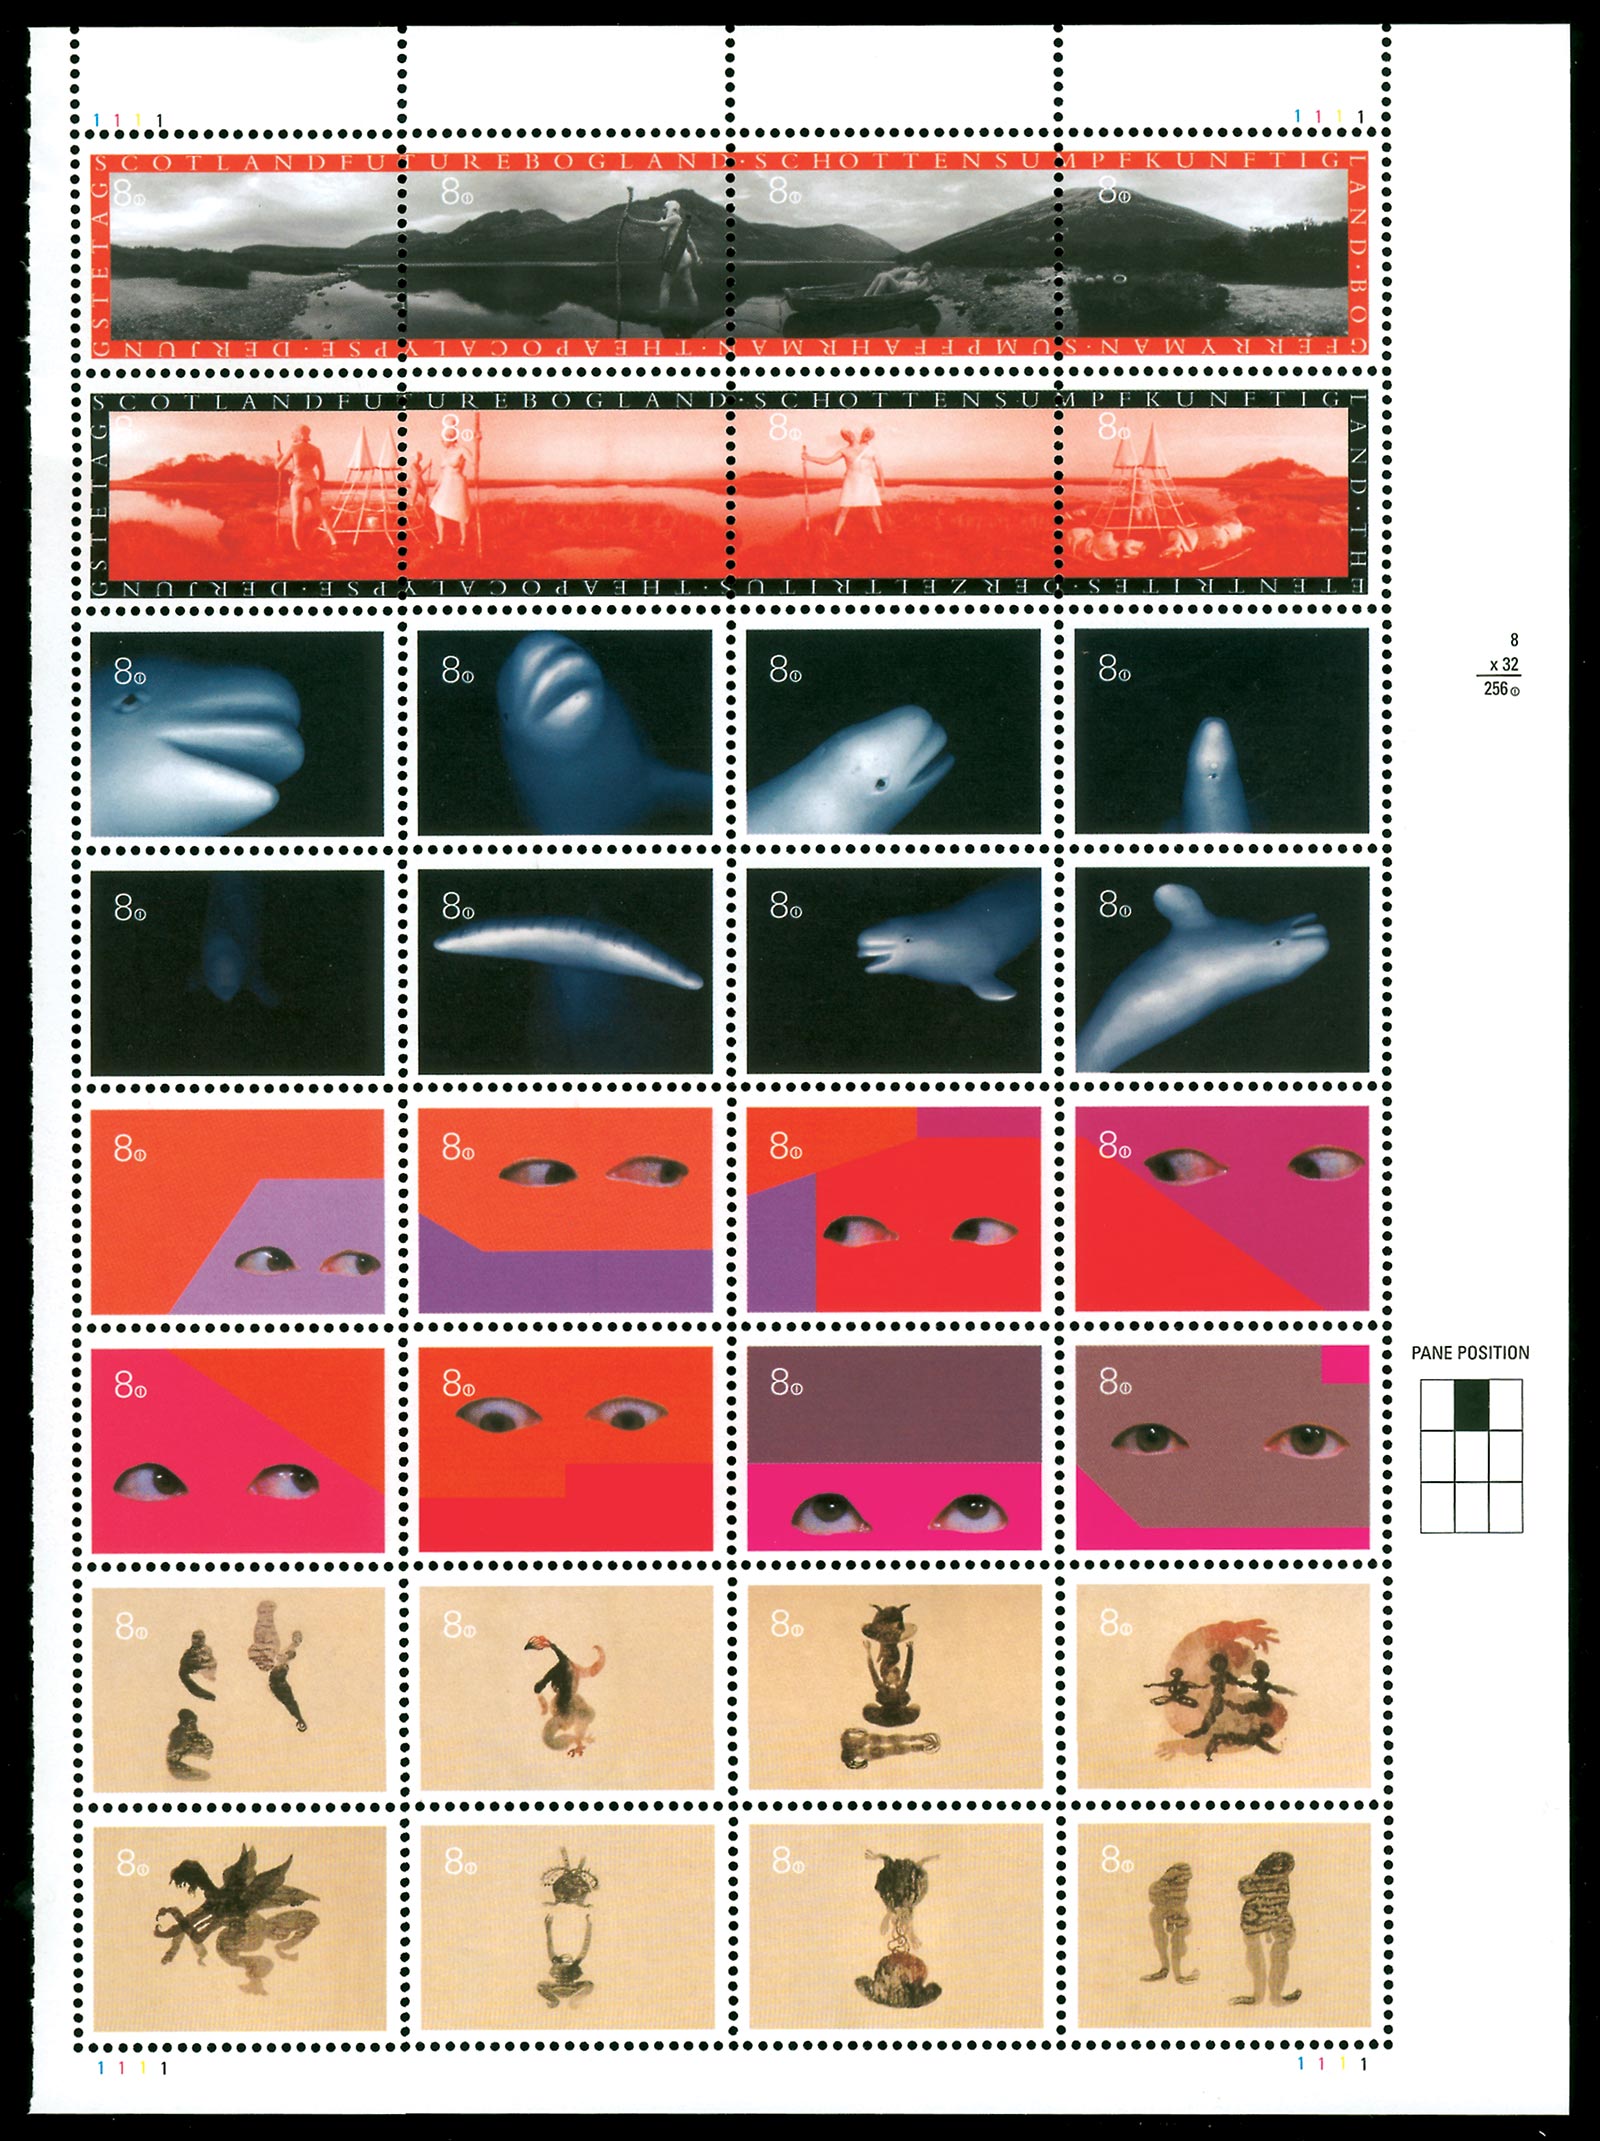 A page of artist-designed postage stamps featuring eight each by Kahn & Selesnick, Richard Massey, Ruth Root, and Shazia Sikander.